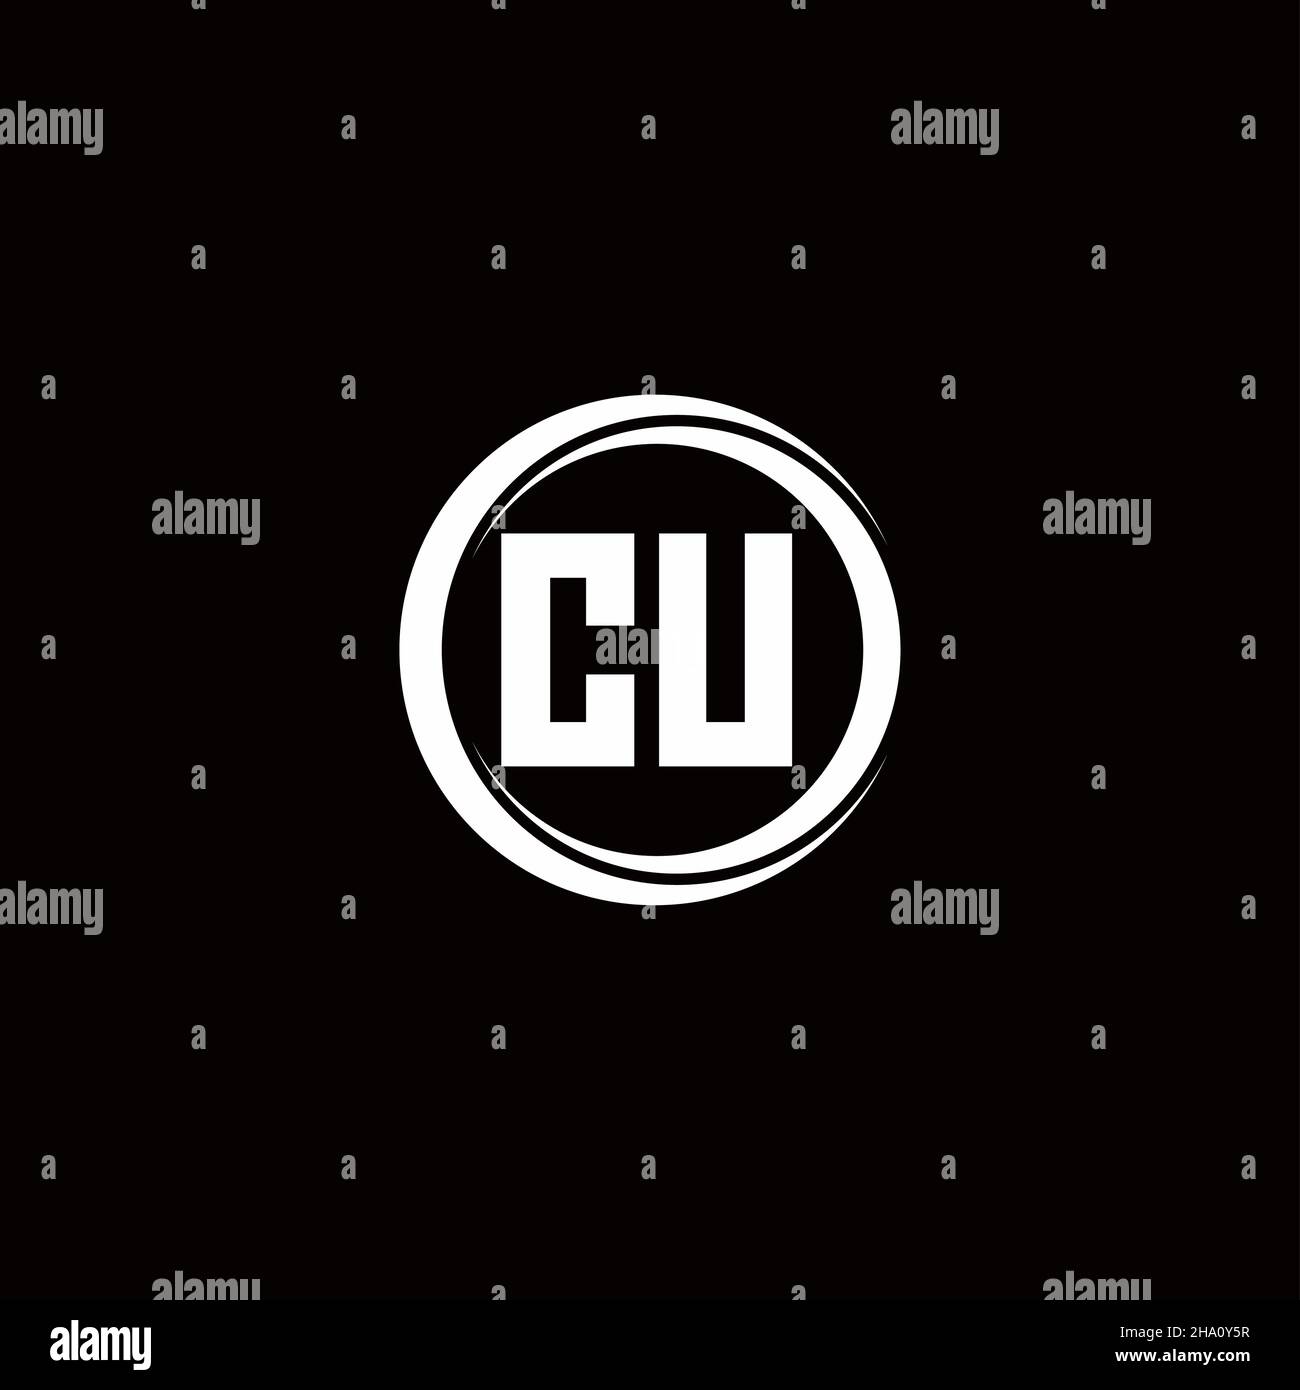 CU logo initial letter monogram with circle slice rounded design ...